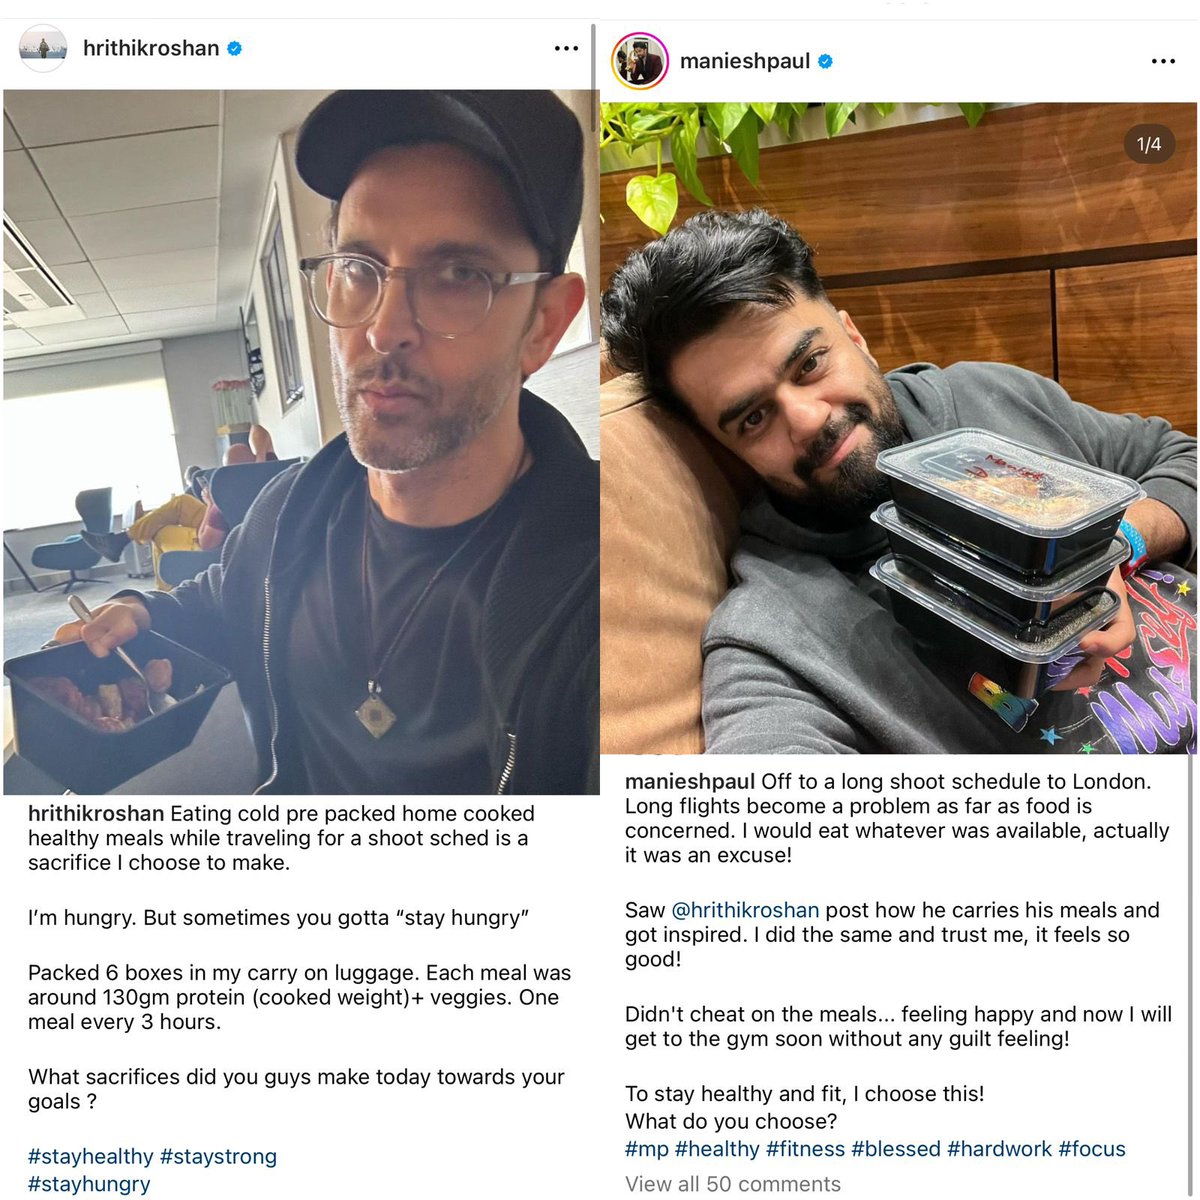 Food for thought - #ManieshPaul posts about how #HrithikRoshan inspires him.